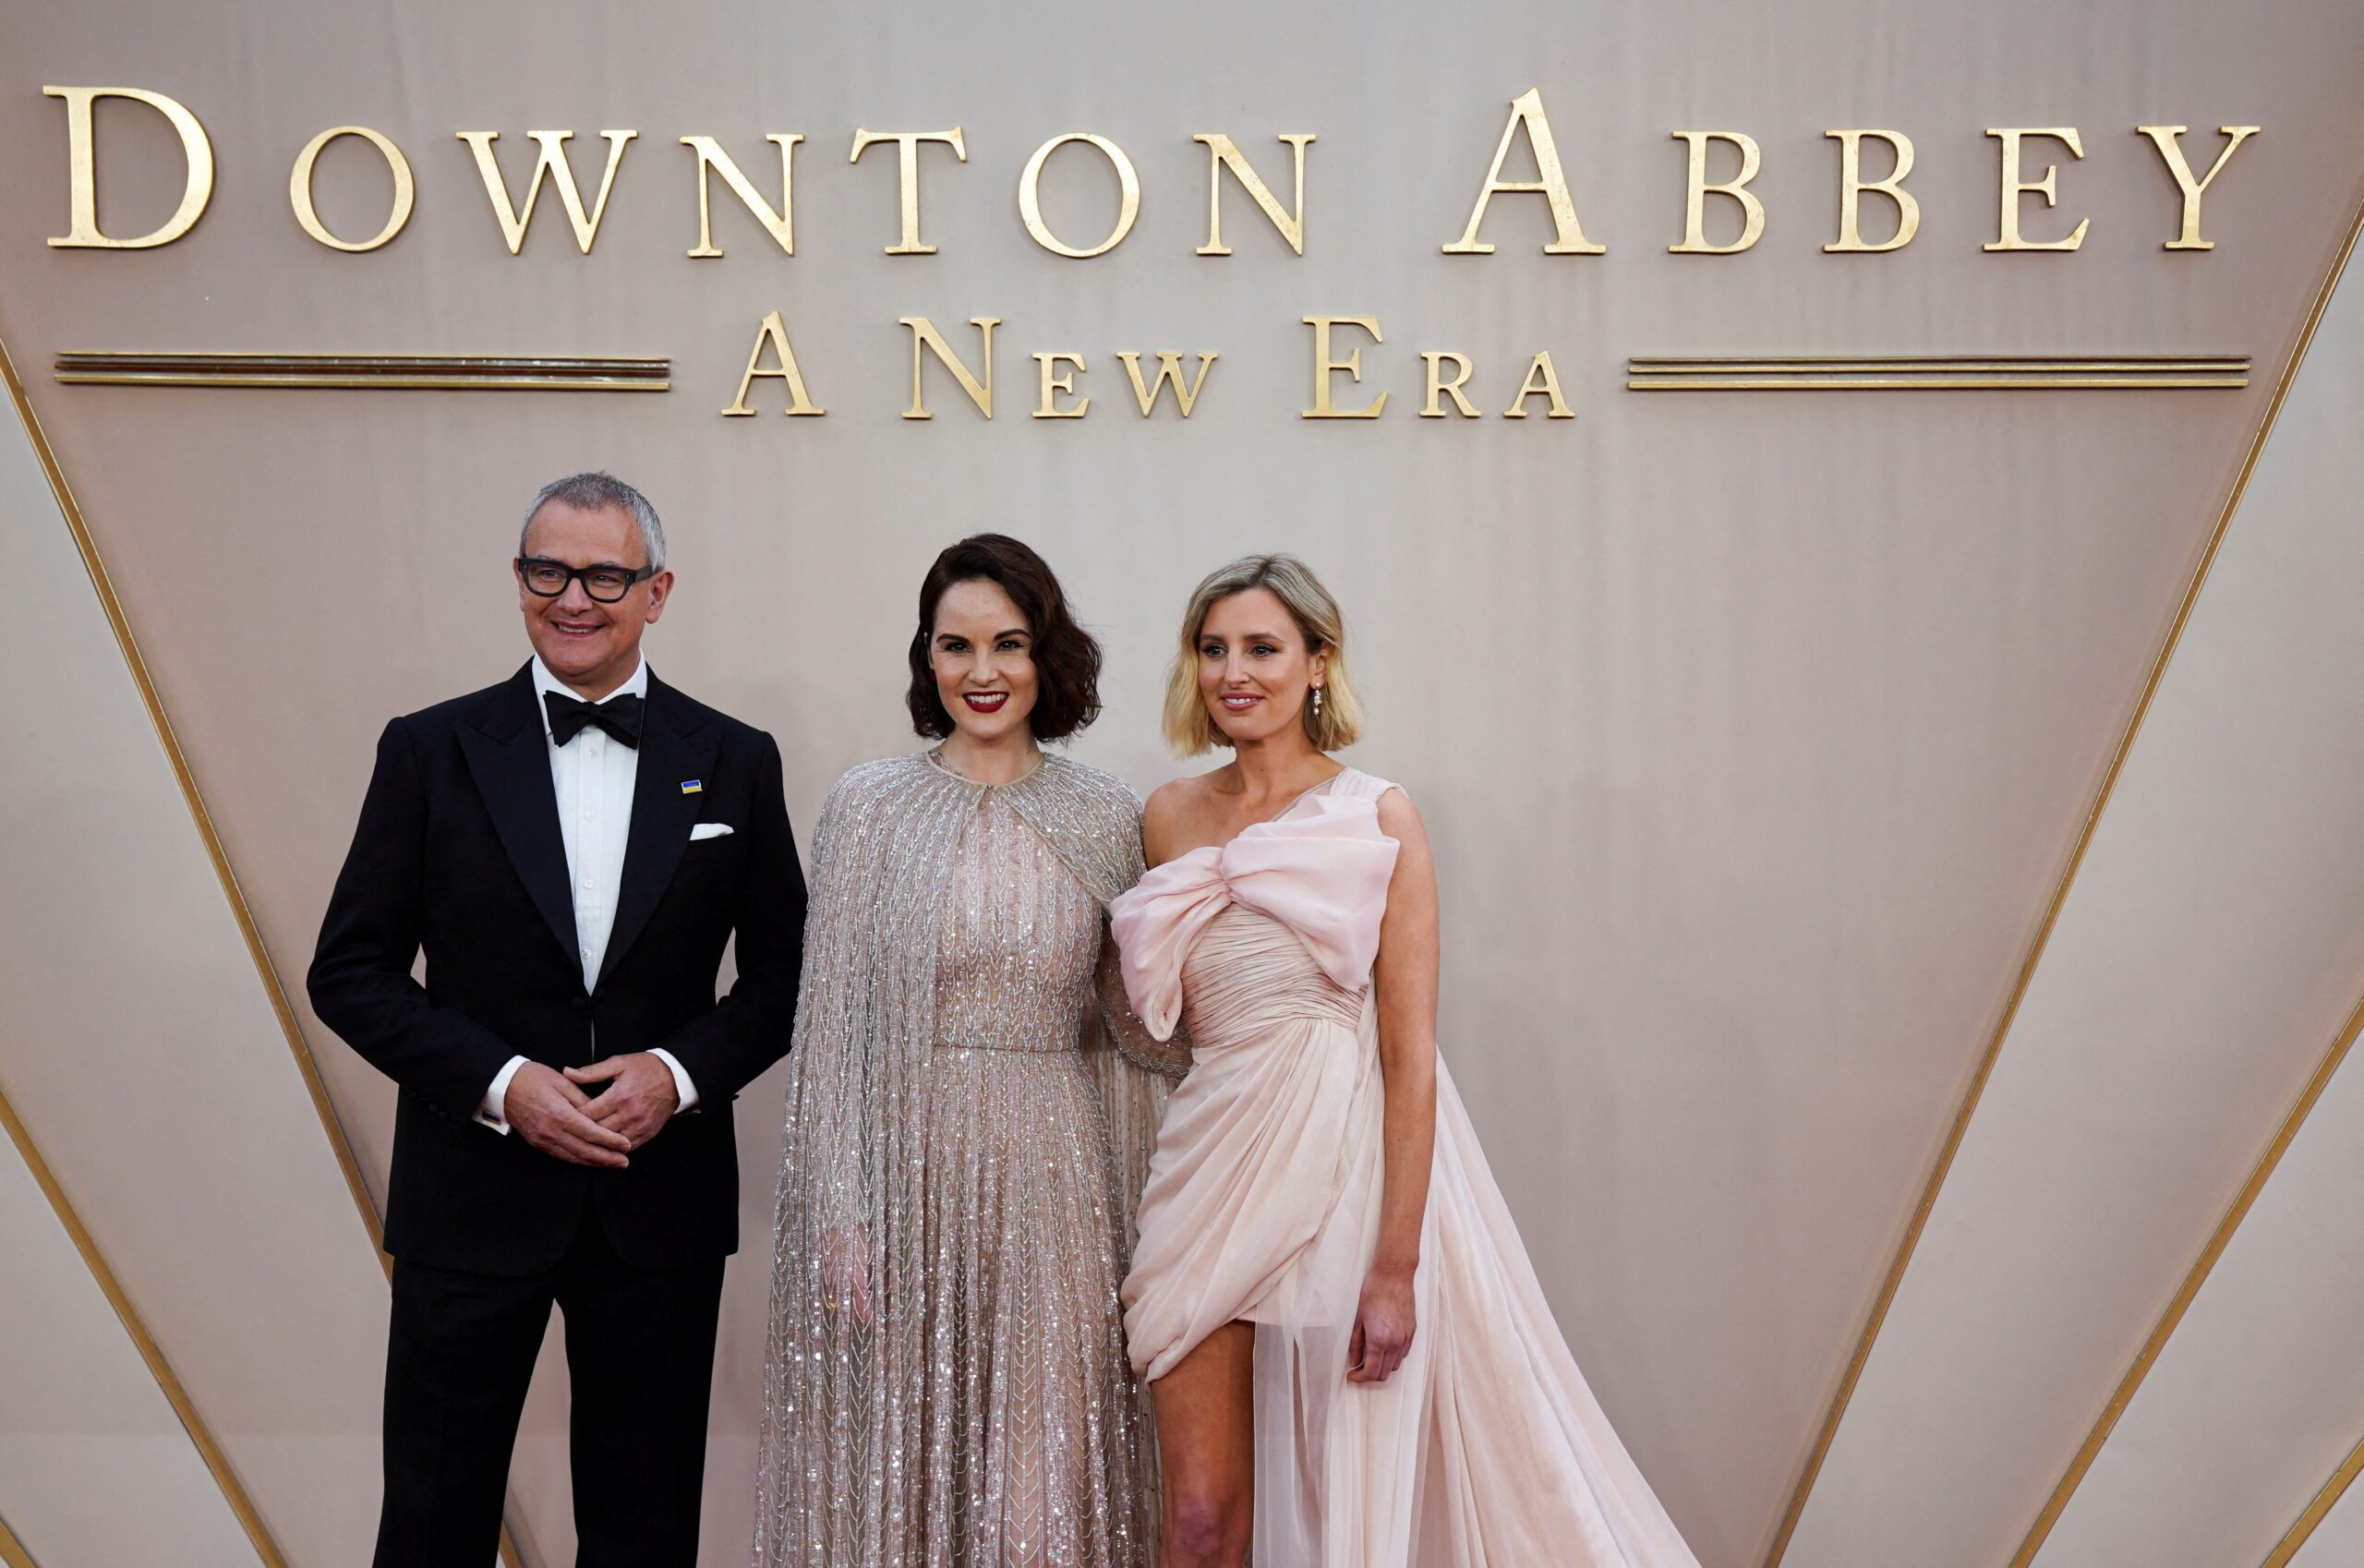 ‘Downton Abbey: A New Era’ starts strong with $16 million as ‘Doctor Strange’ rules again